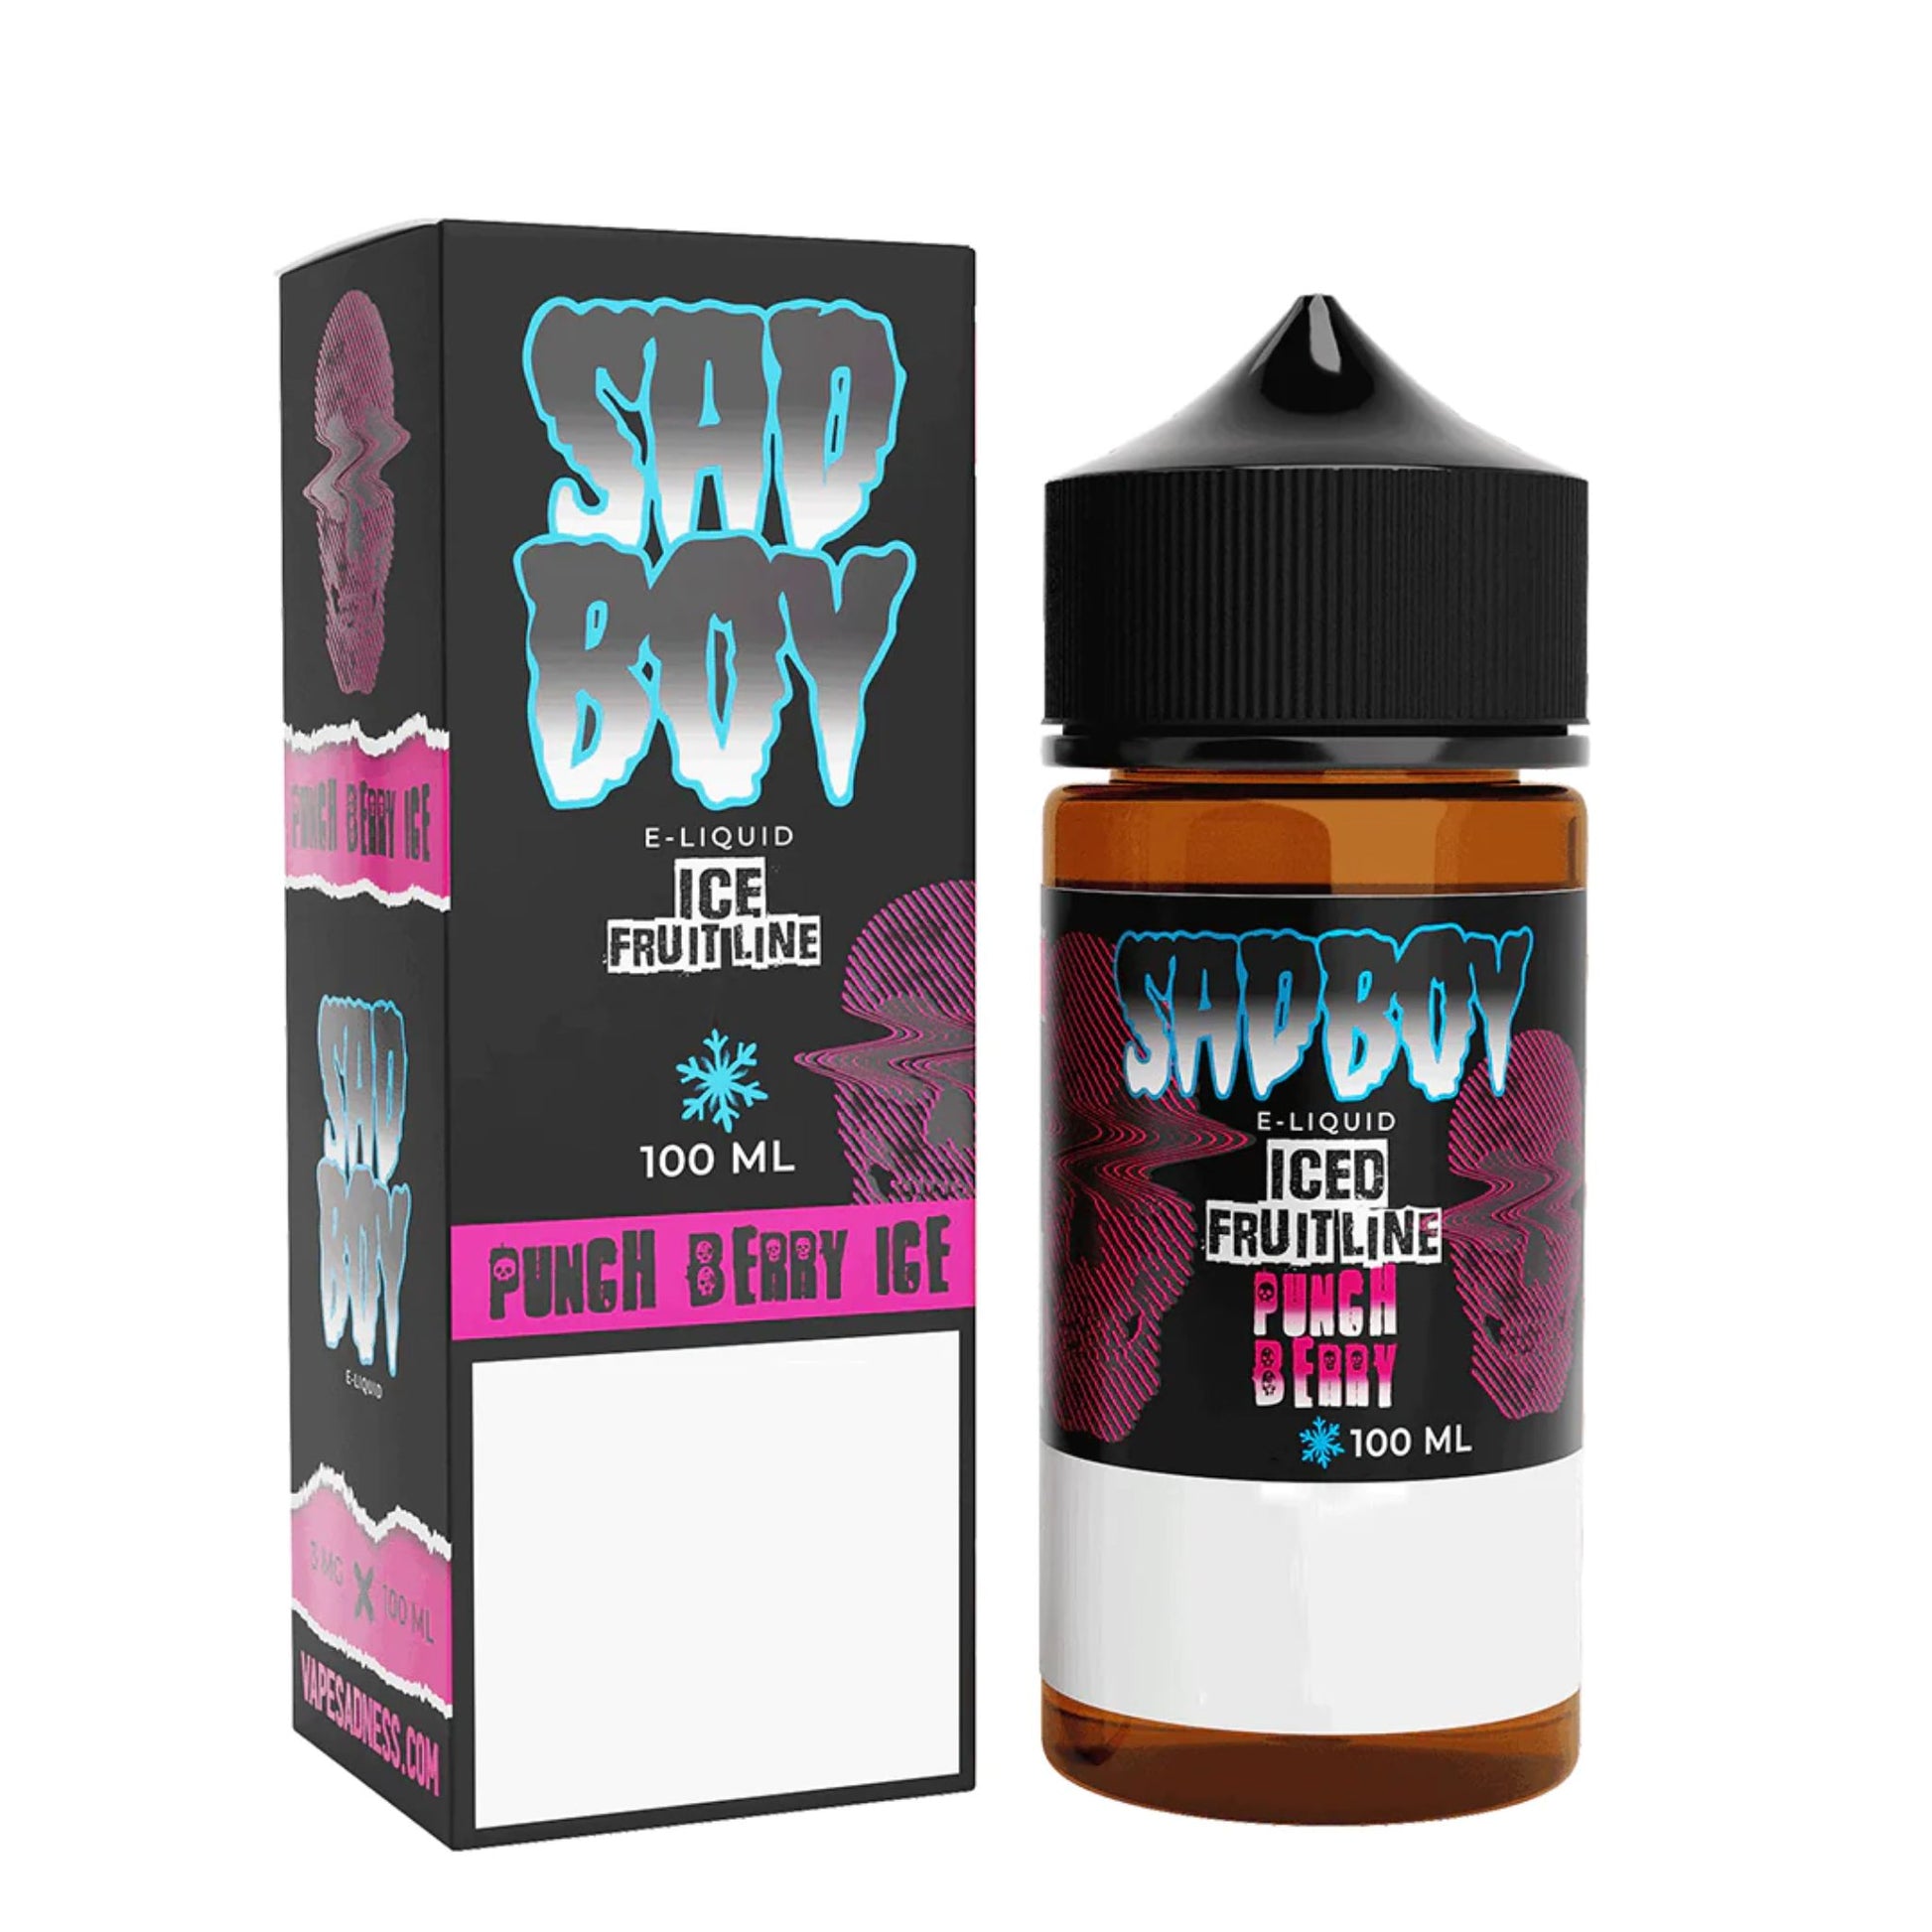 Sadboy | Punch Berry Ice | 100ml bottle and box